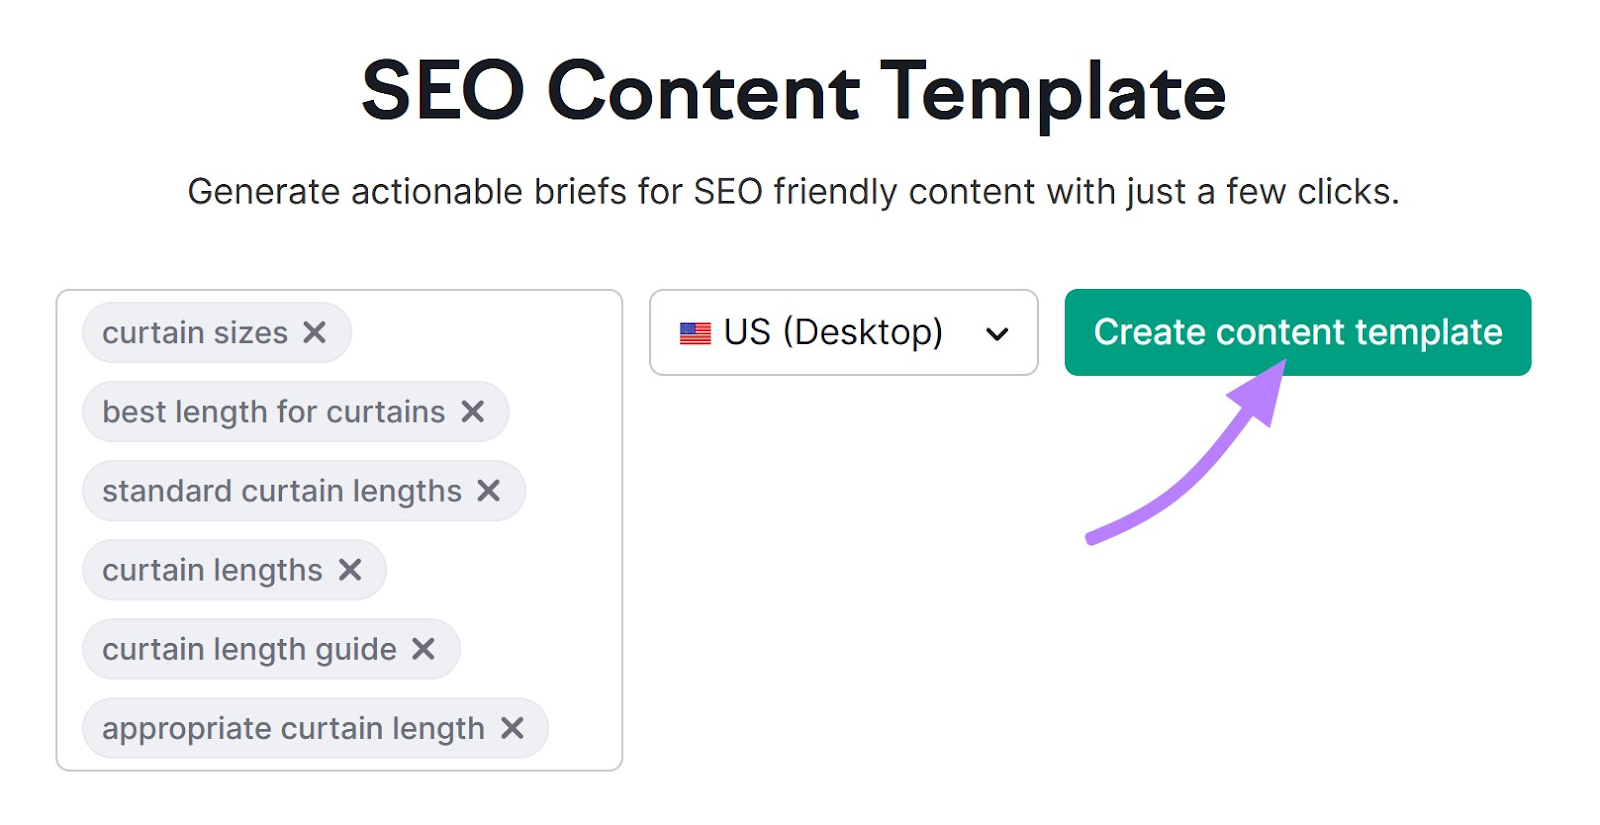 Create content template with SEO Content Template tool